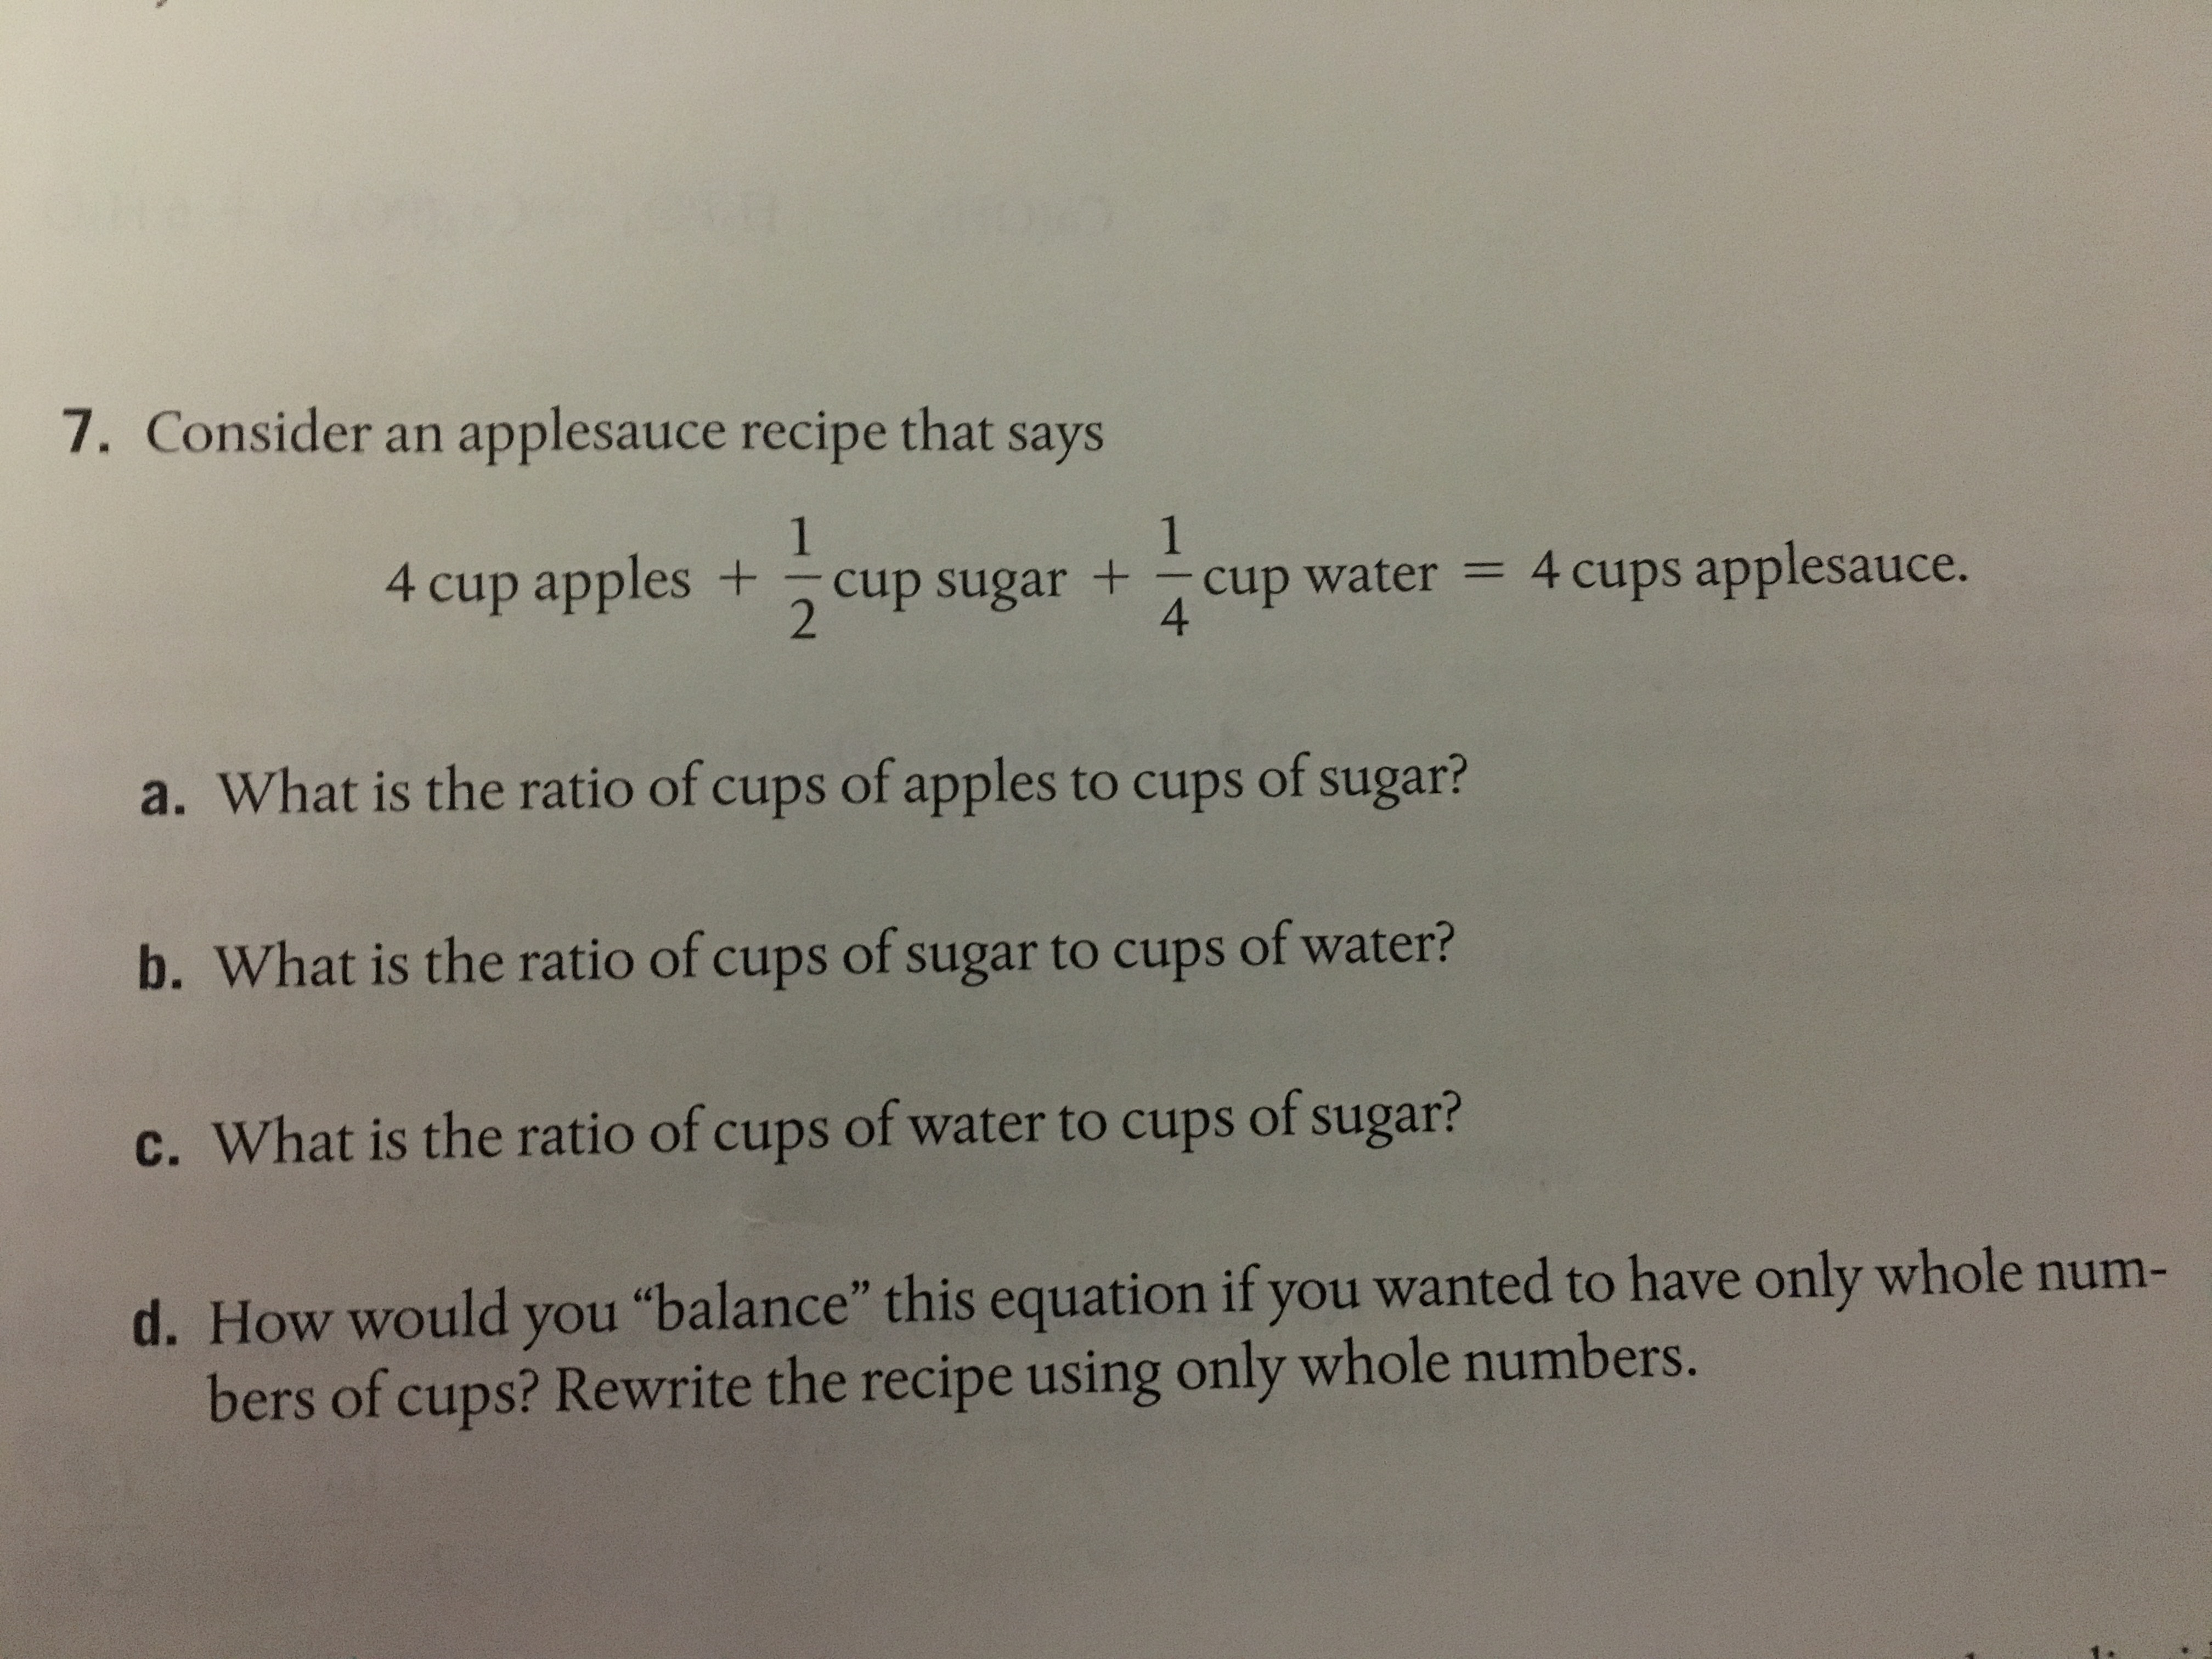 7. Consider an applesauce recipe that says
4 cup apples +-cup sugar +-cup water = 4 cups applesauce.
4
2
a. What is the ratio of cups of apples to cups of sugar?
b. What is the ratio of cups of sugar to cups of water?
c. What is the ratio of cups of water to cups of sugar?
d. How would you "balance' this equation ifyou wanted to have only whole num-
bers of cups? Rewrite the recipe using only whole nu
